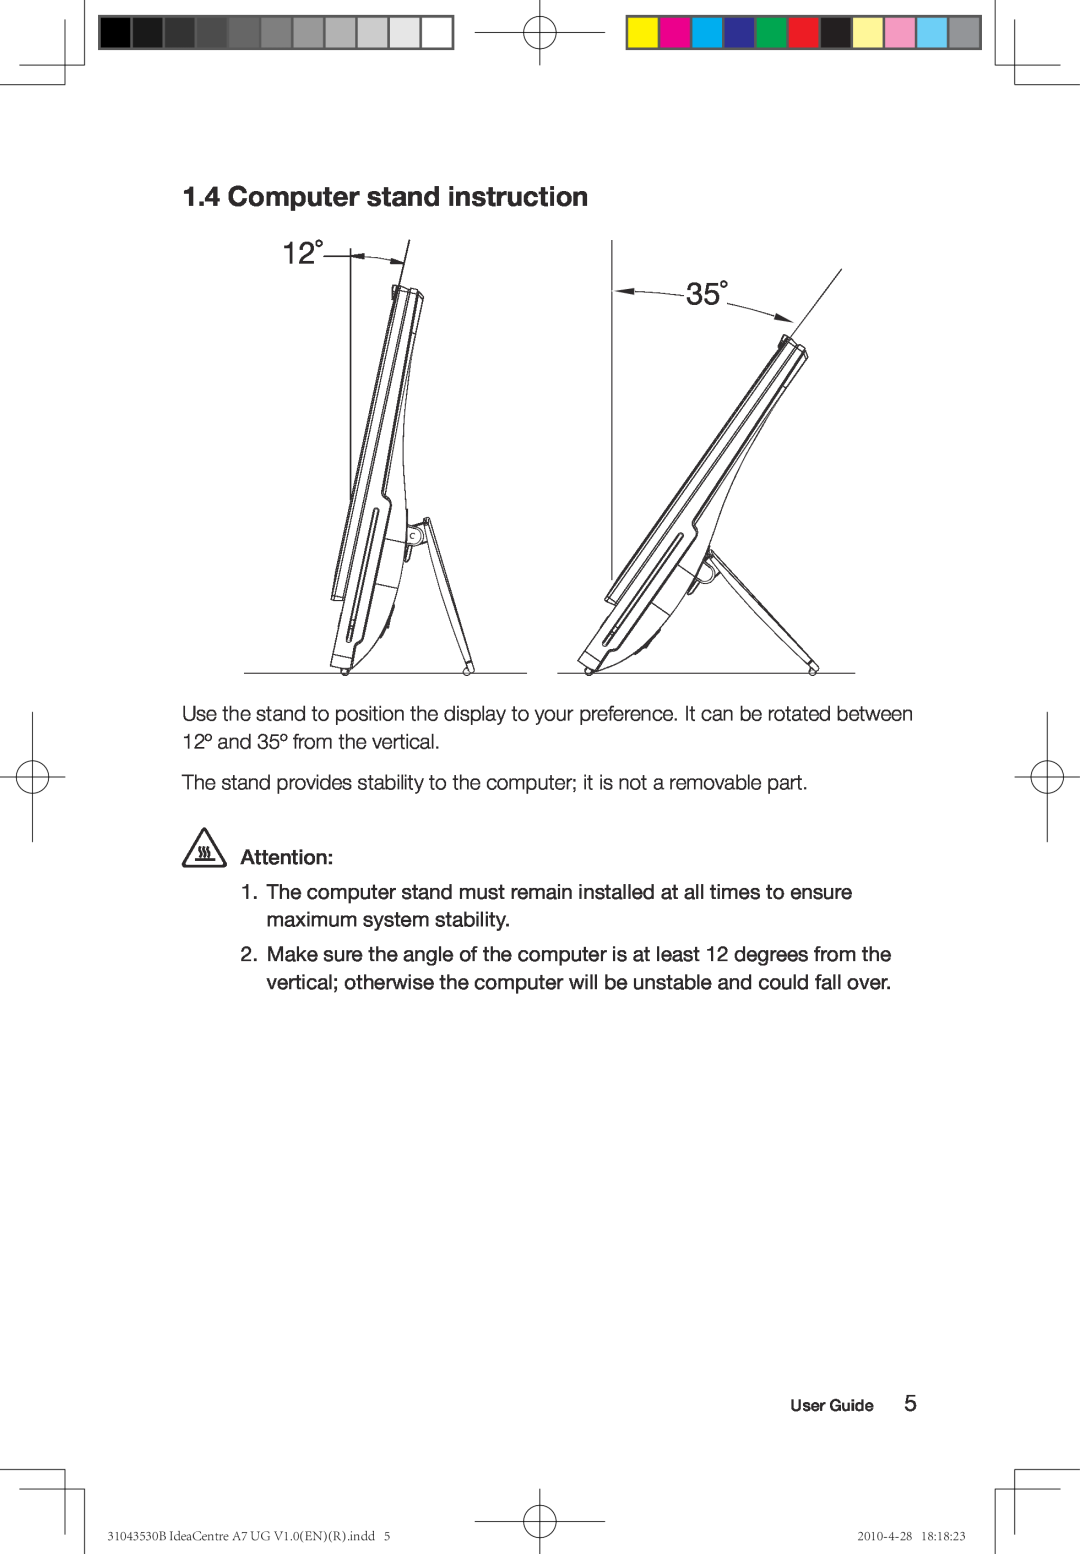 Lenovo A7 manual 12˚ 35˚, Computer stand instruction 